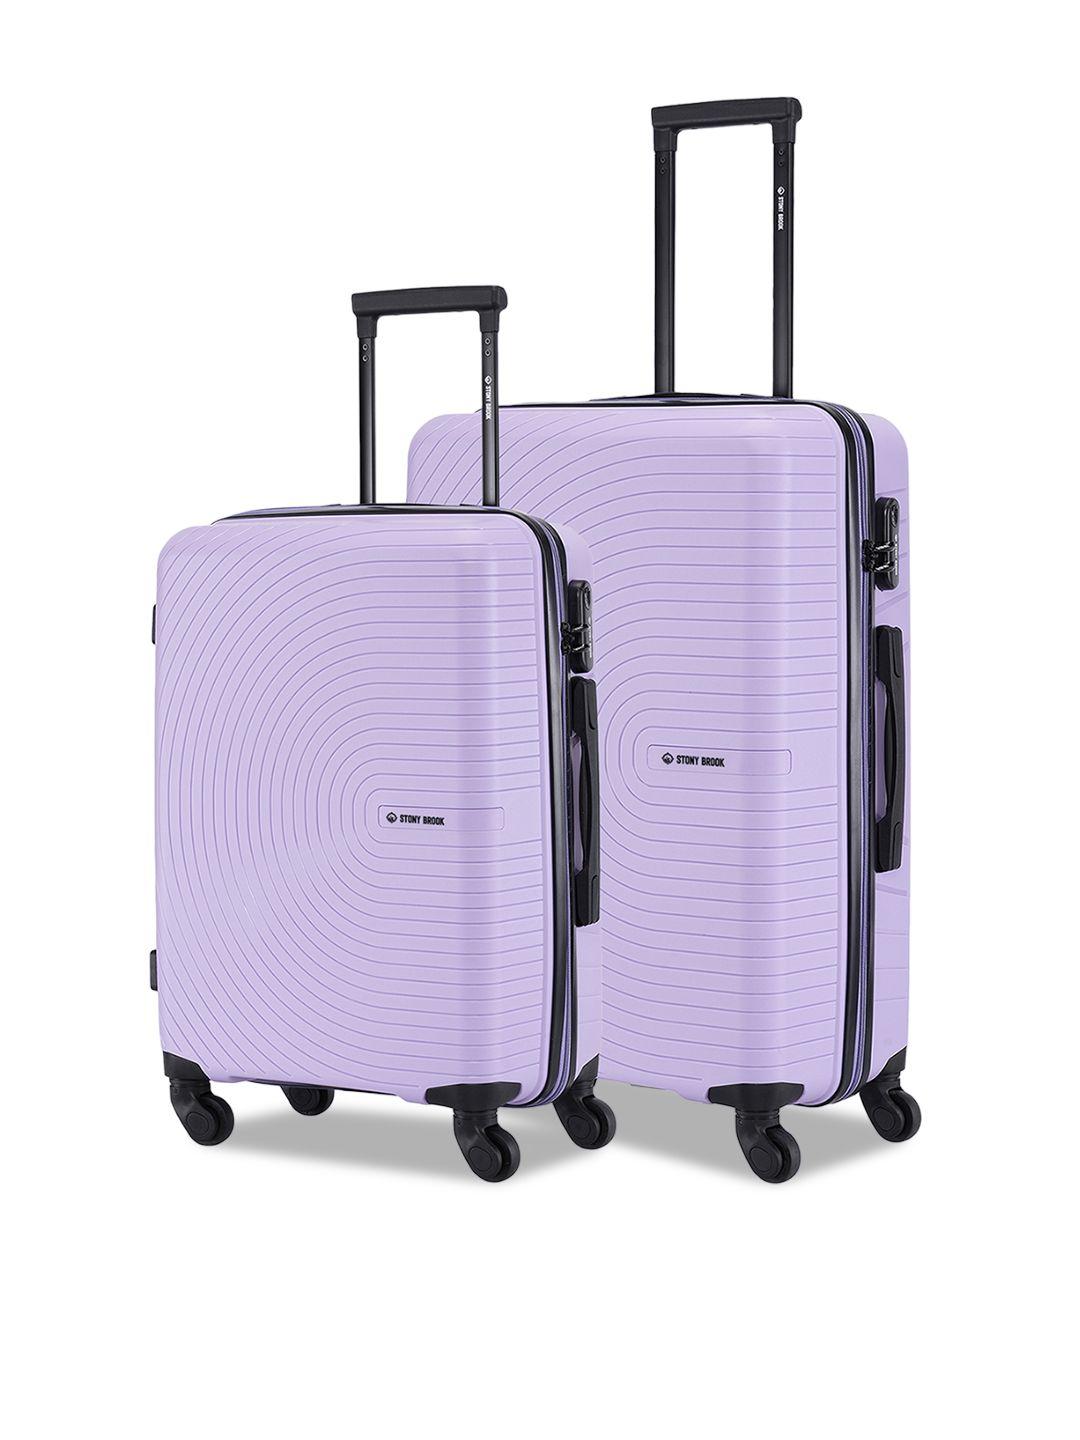 stony brook by nasher miles crescent set of 2 hard-sided trolley suitcase-50 l